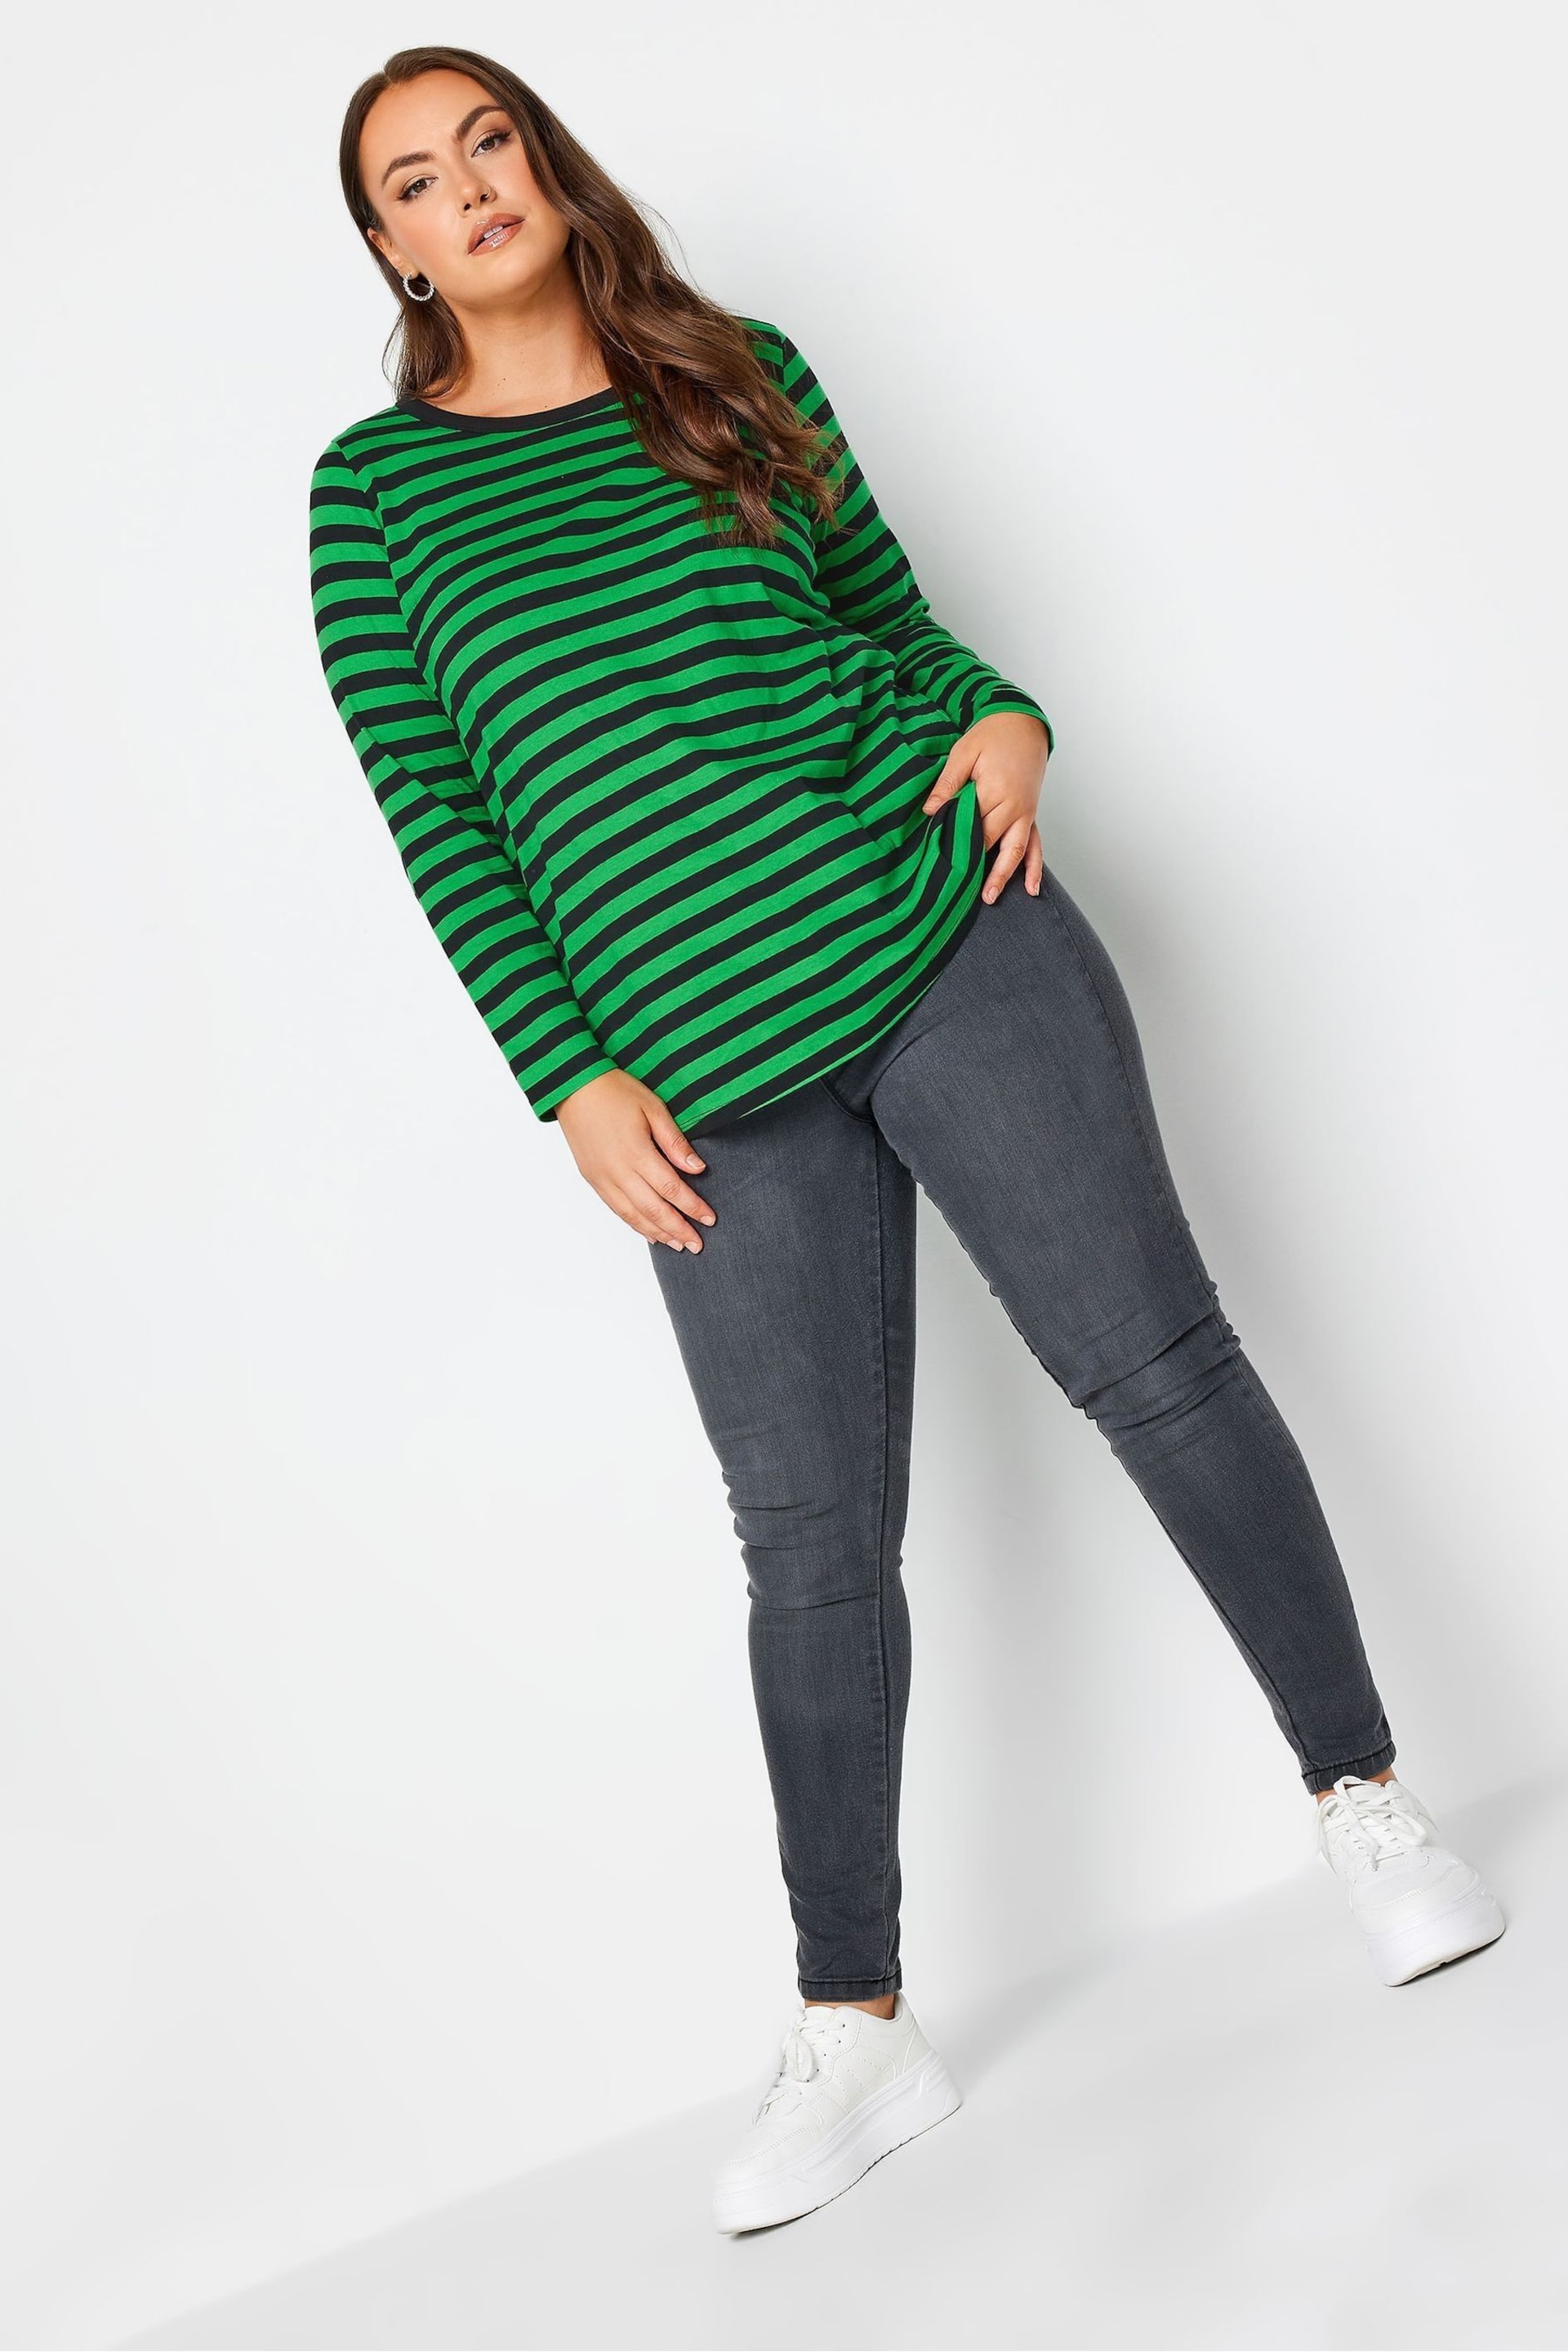 Yours Curve Dark Green Longsleeve Stripe T-Shirts 2 Packs - Image 4 of 5